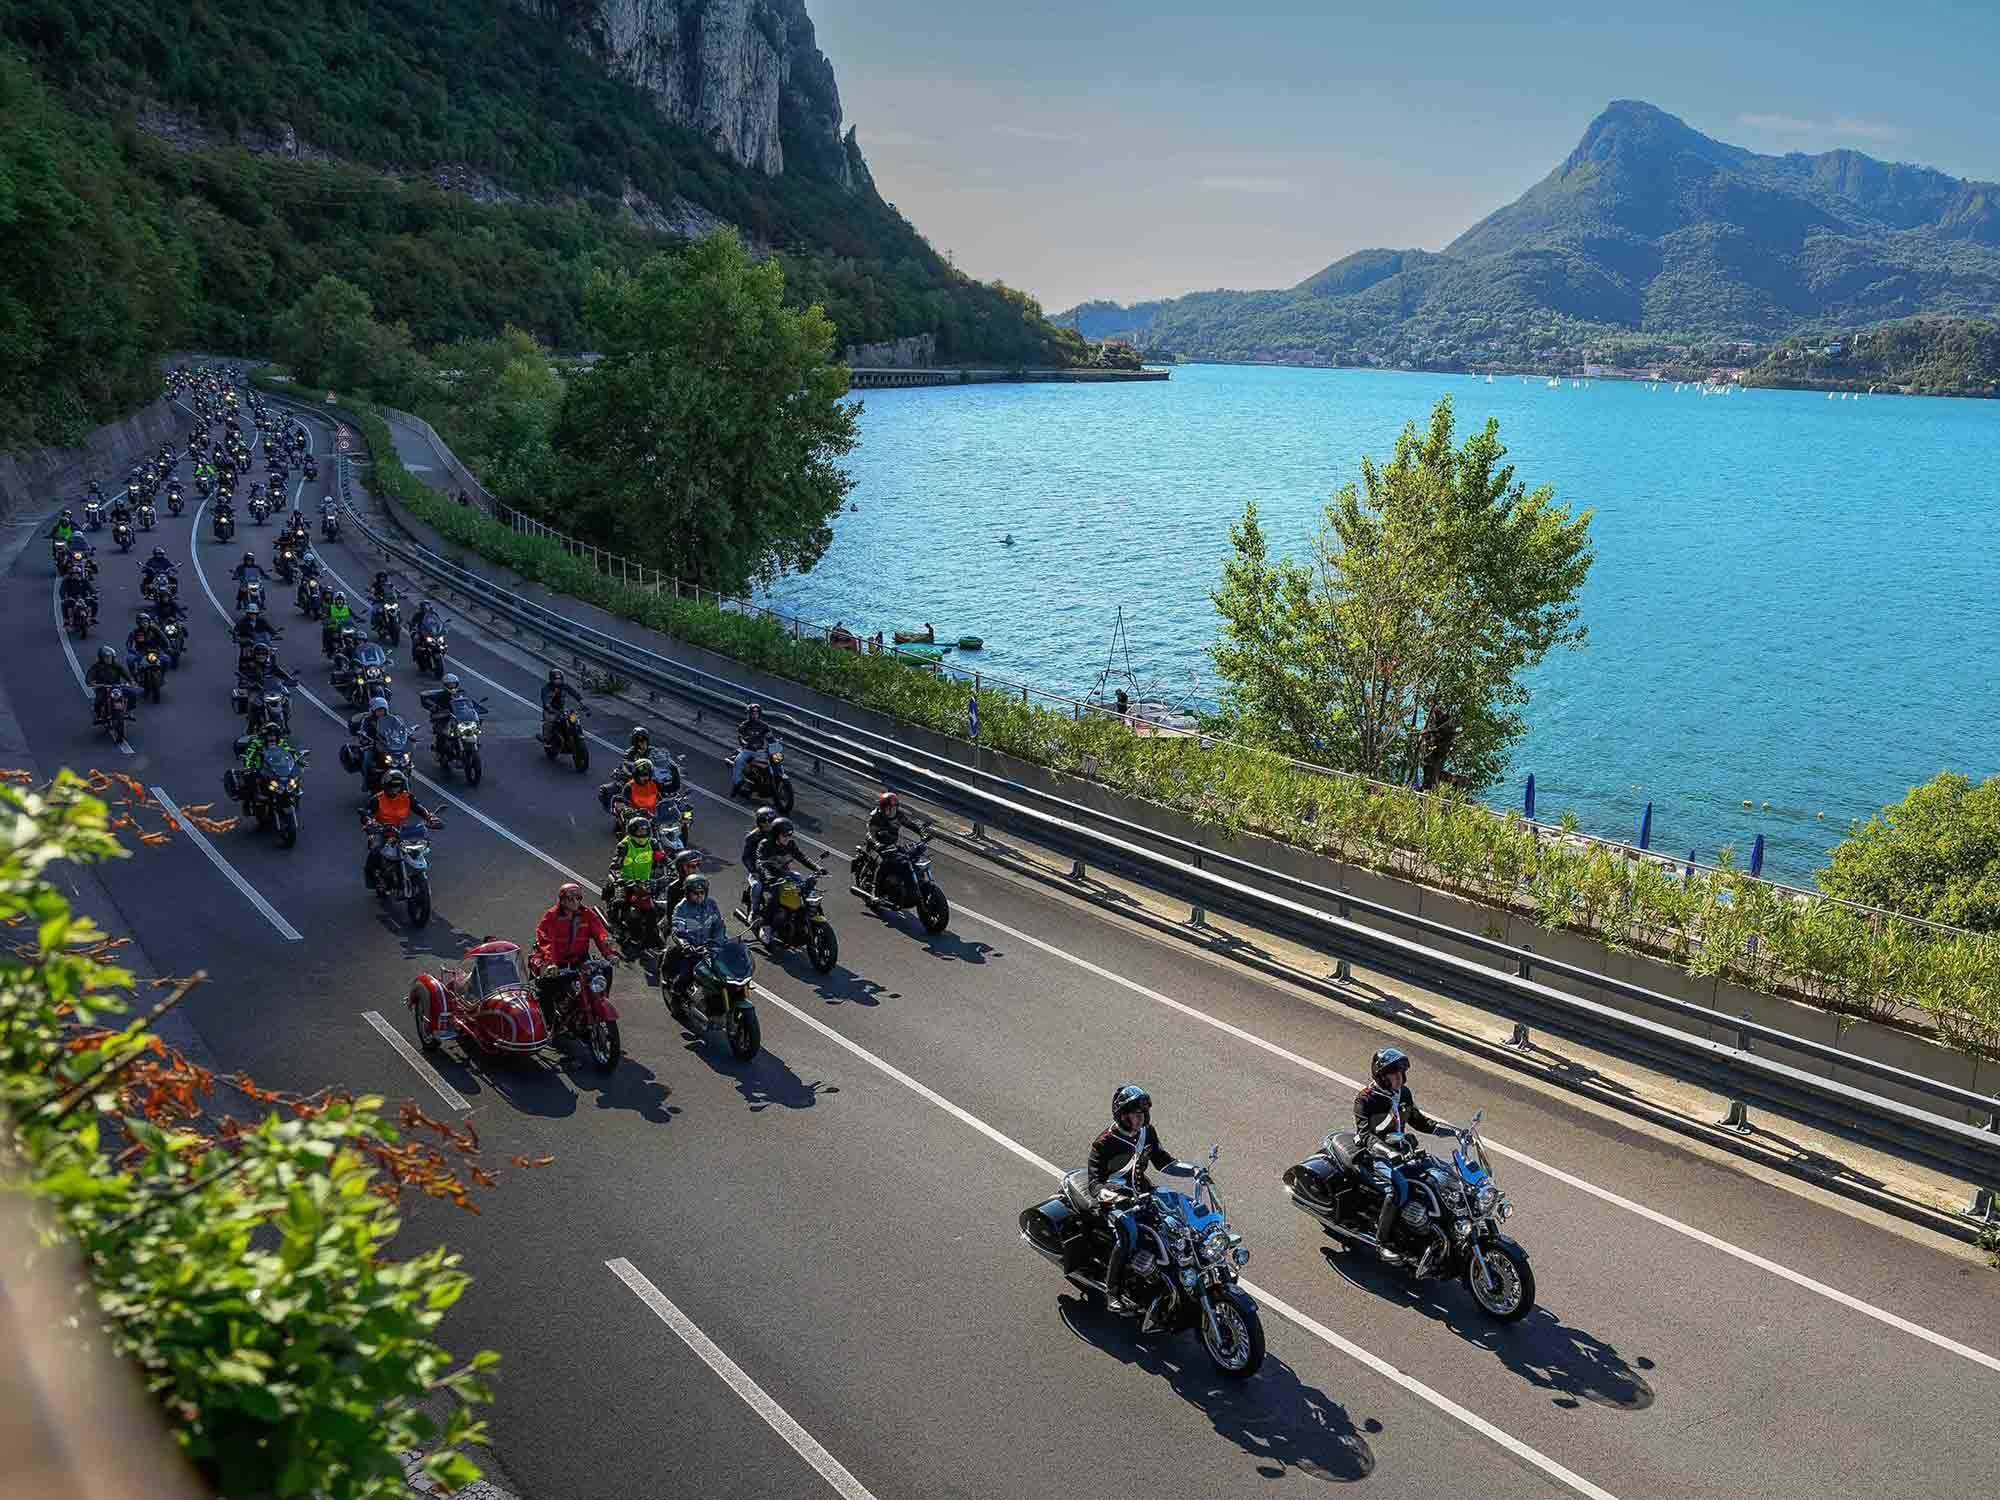 Led by a pair of California 1400 police bikes, a near-endless stream of Moto Guzzis of every age and color make their way on the road circumscribing Lake Como. Squint hard and you’ll make out Ewan McGregor on the V100 next to the red sidecar outfit in the first row.